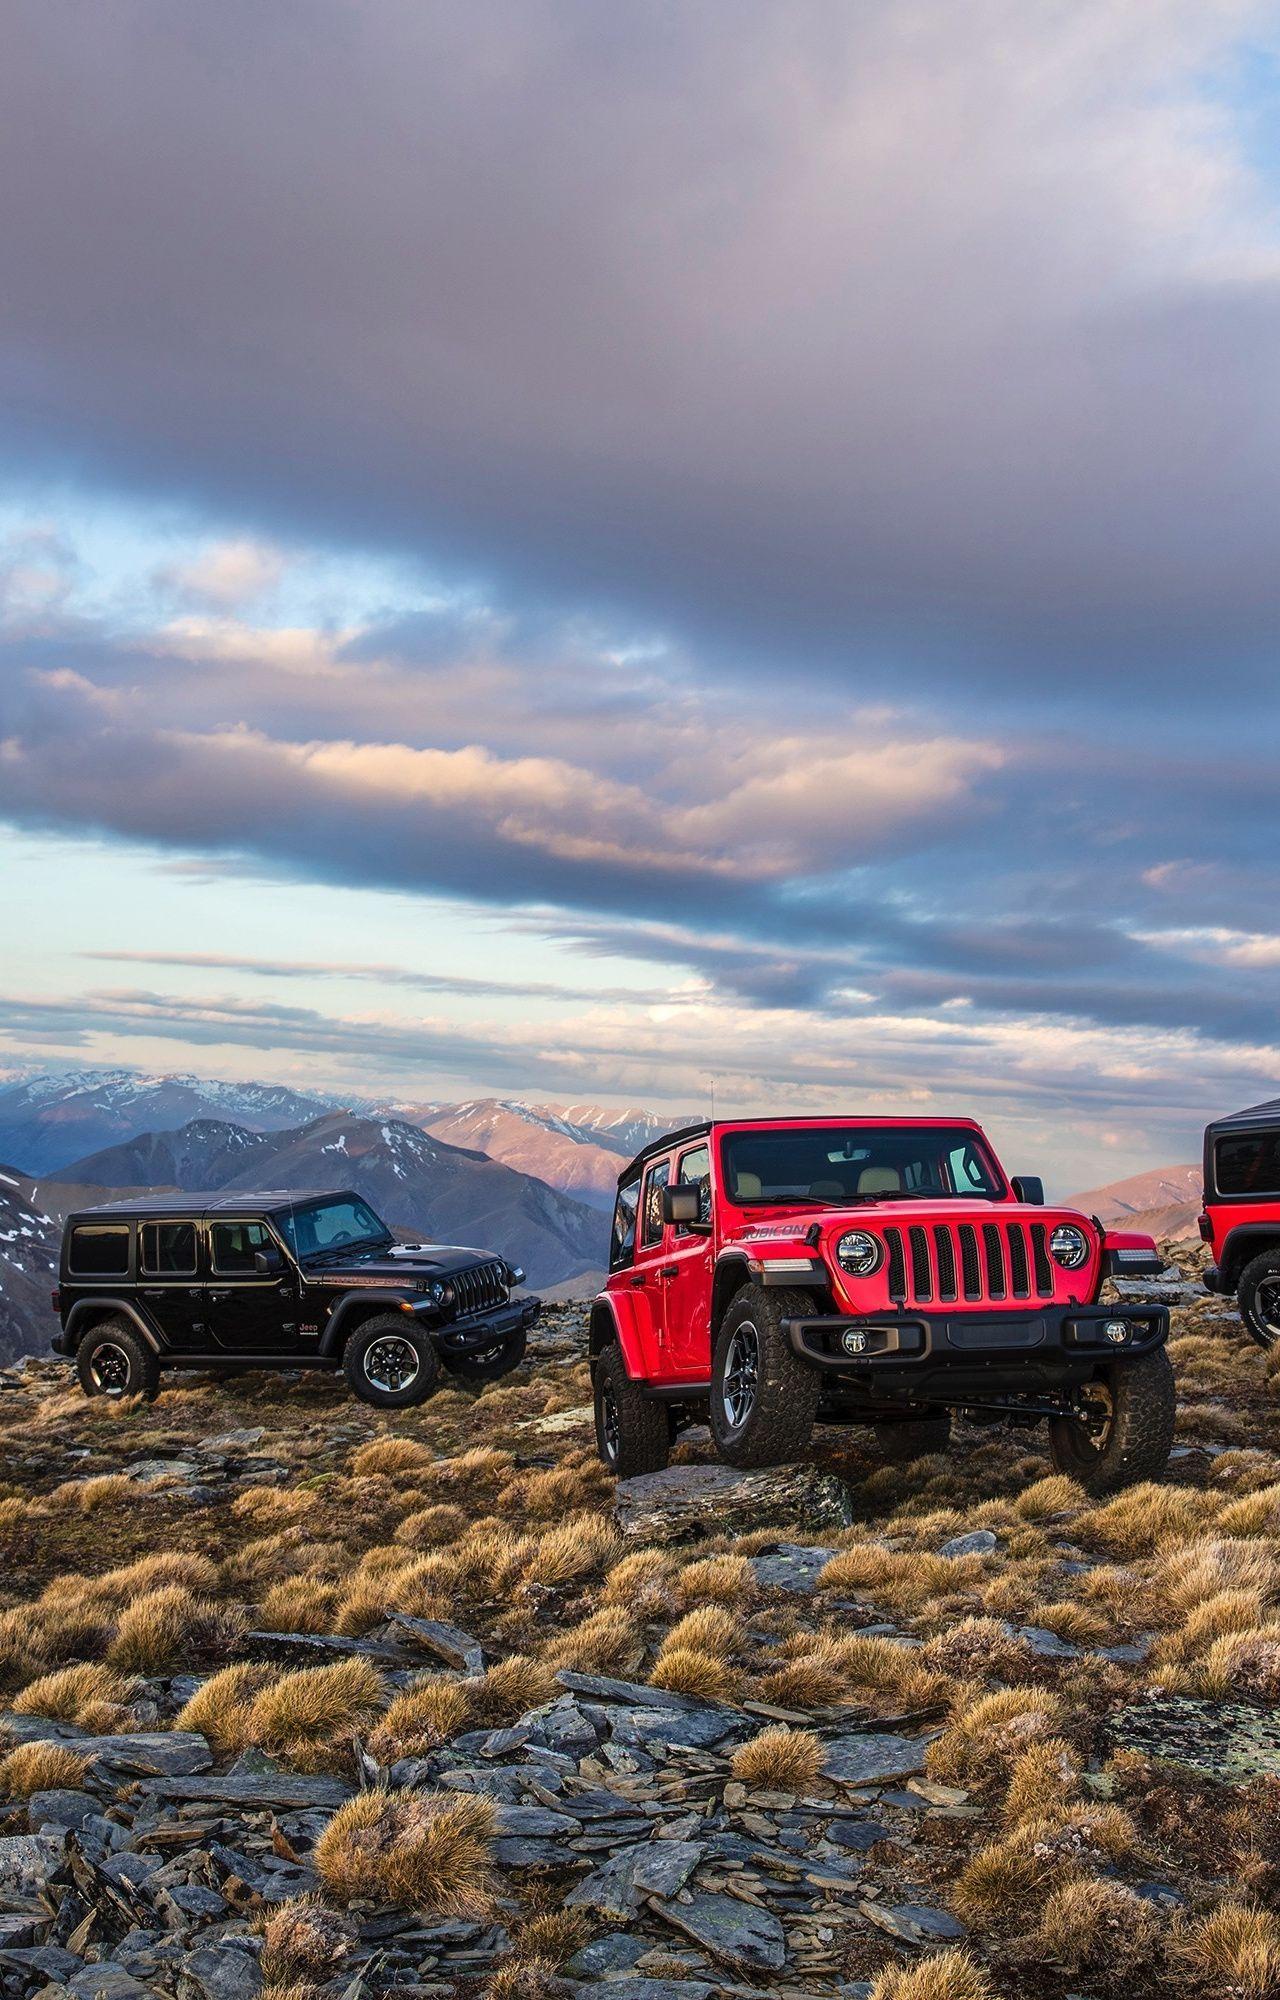 Jeep Wrangler Rubicon Wallpapers  Top 13 Best Jeep Wrangler Rubicon  Wallpapers  HQ 